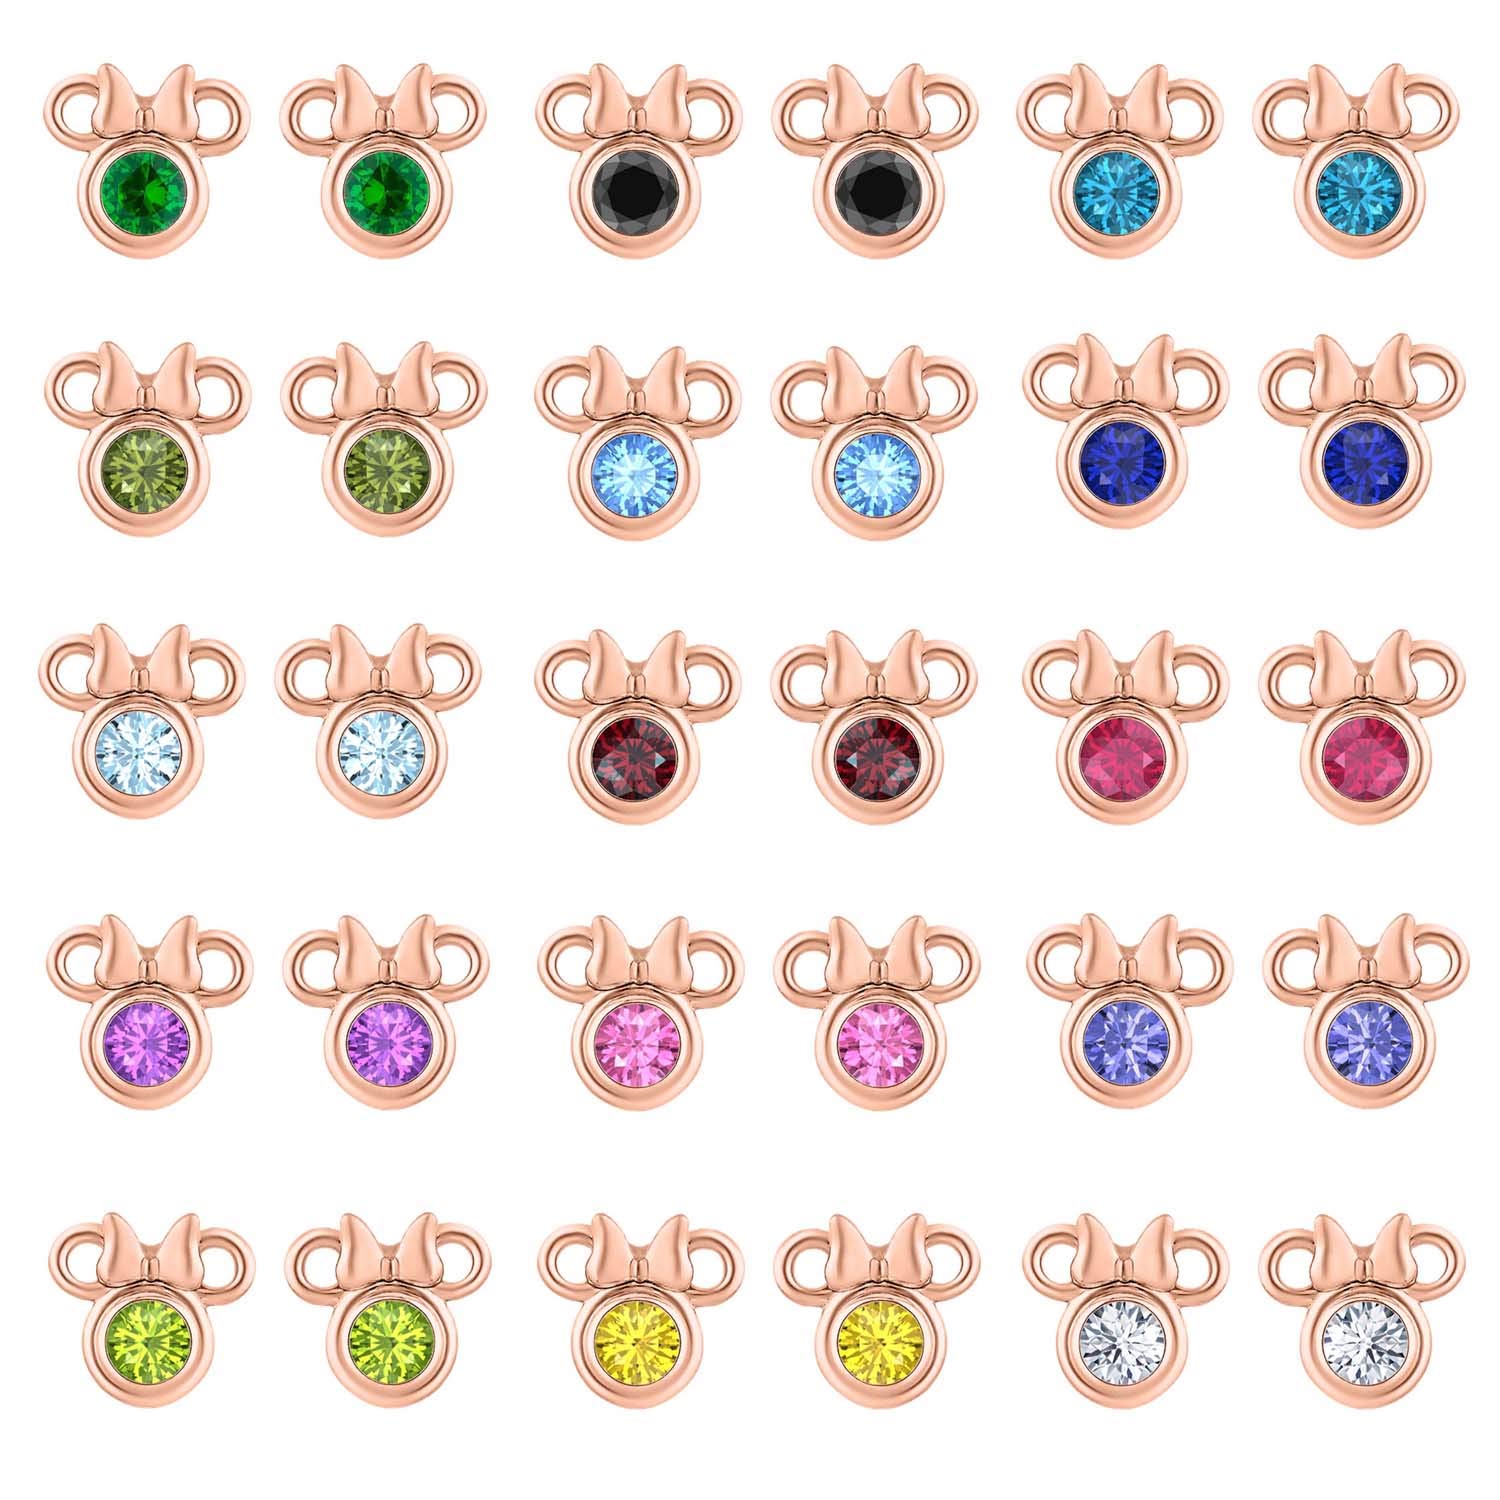 Gold & Diamonds Jewellery Mickey or Minnie Mouse Stud Earrings for Women Girl Birthday Gift 14k Rose Gold Over .925 Sterling Silver Gemstones Earrings Size : 8mm x 8mm)